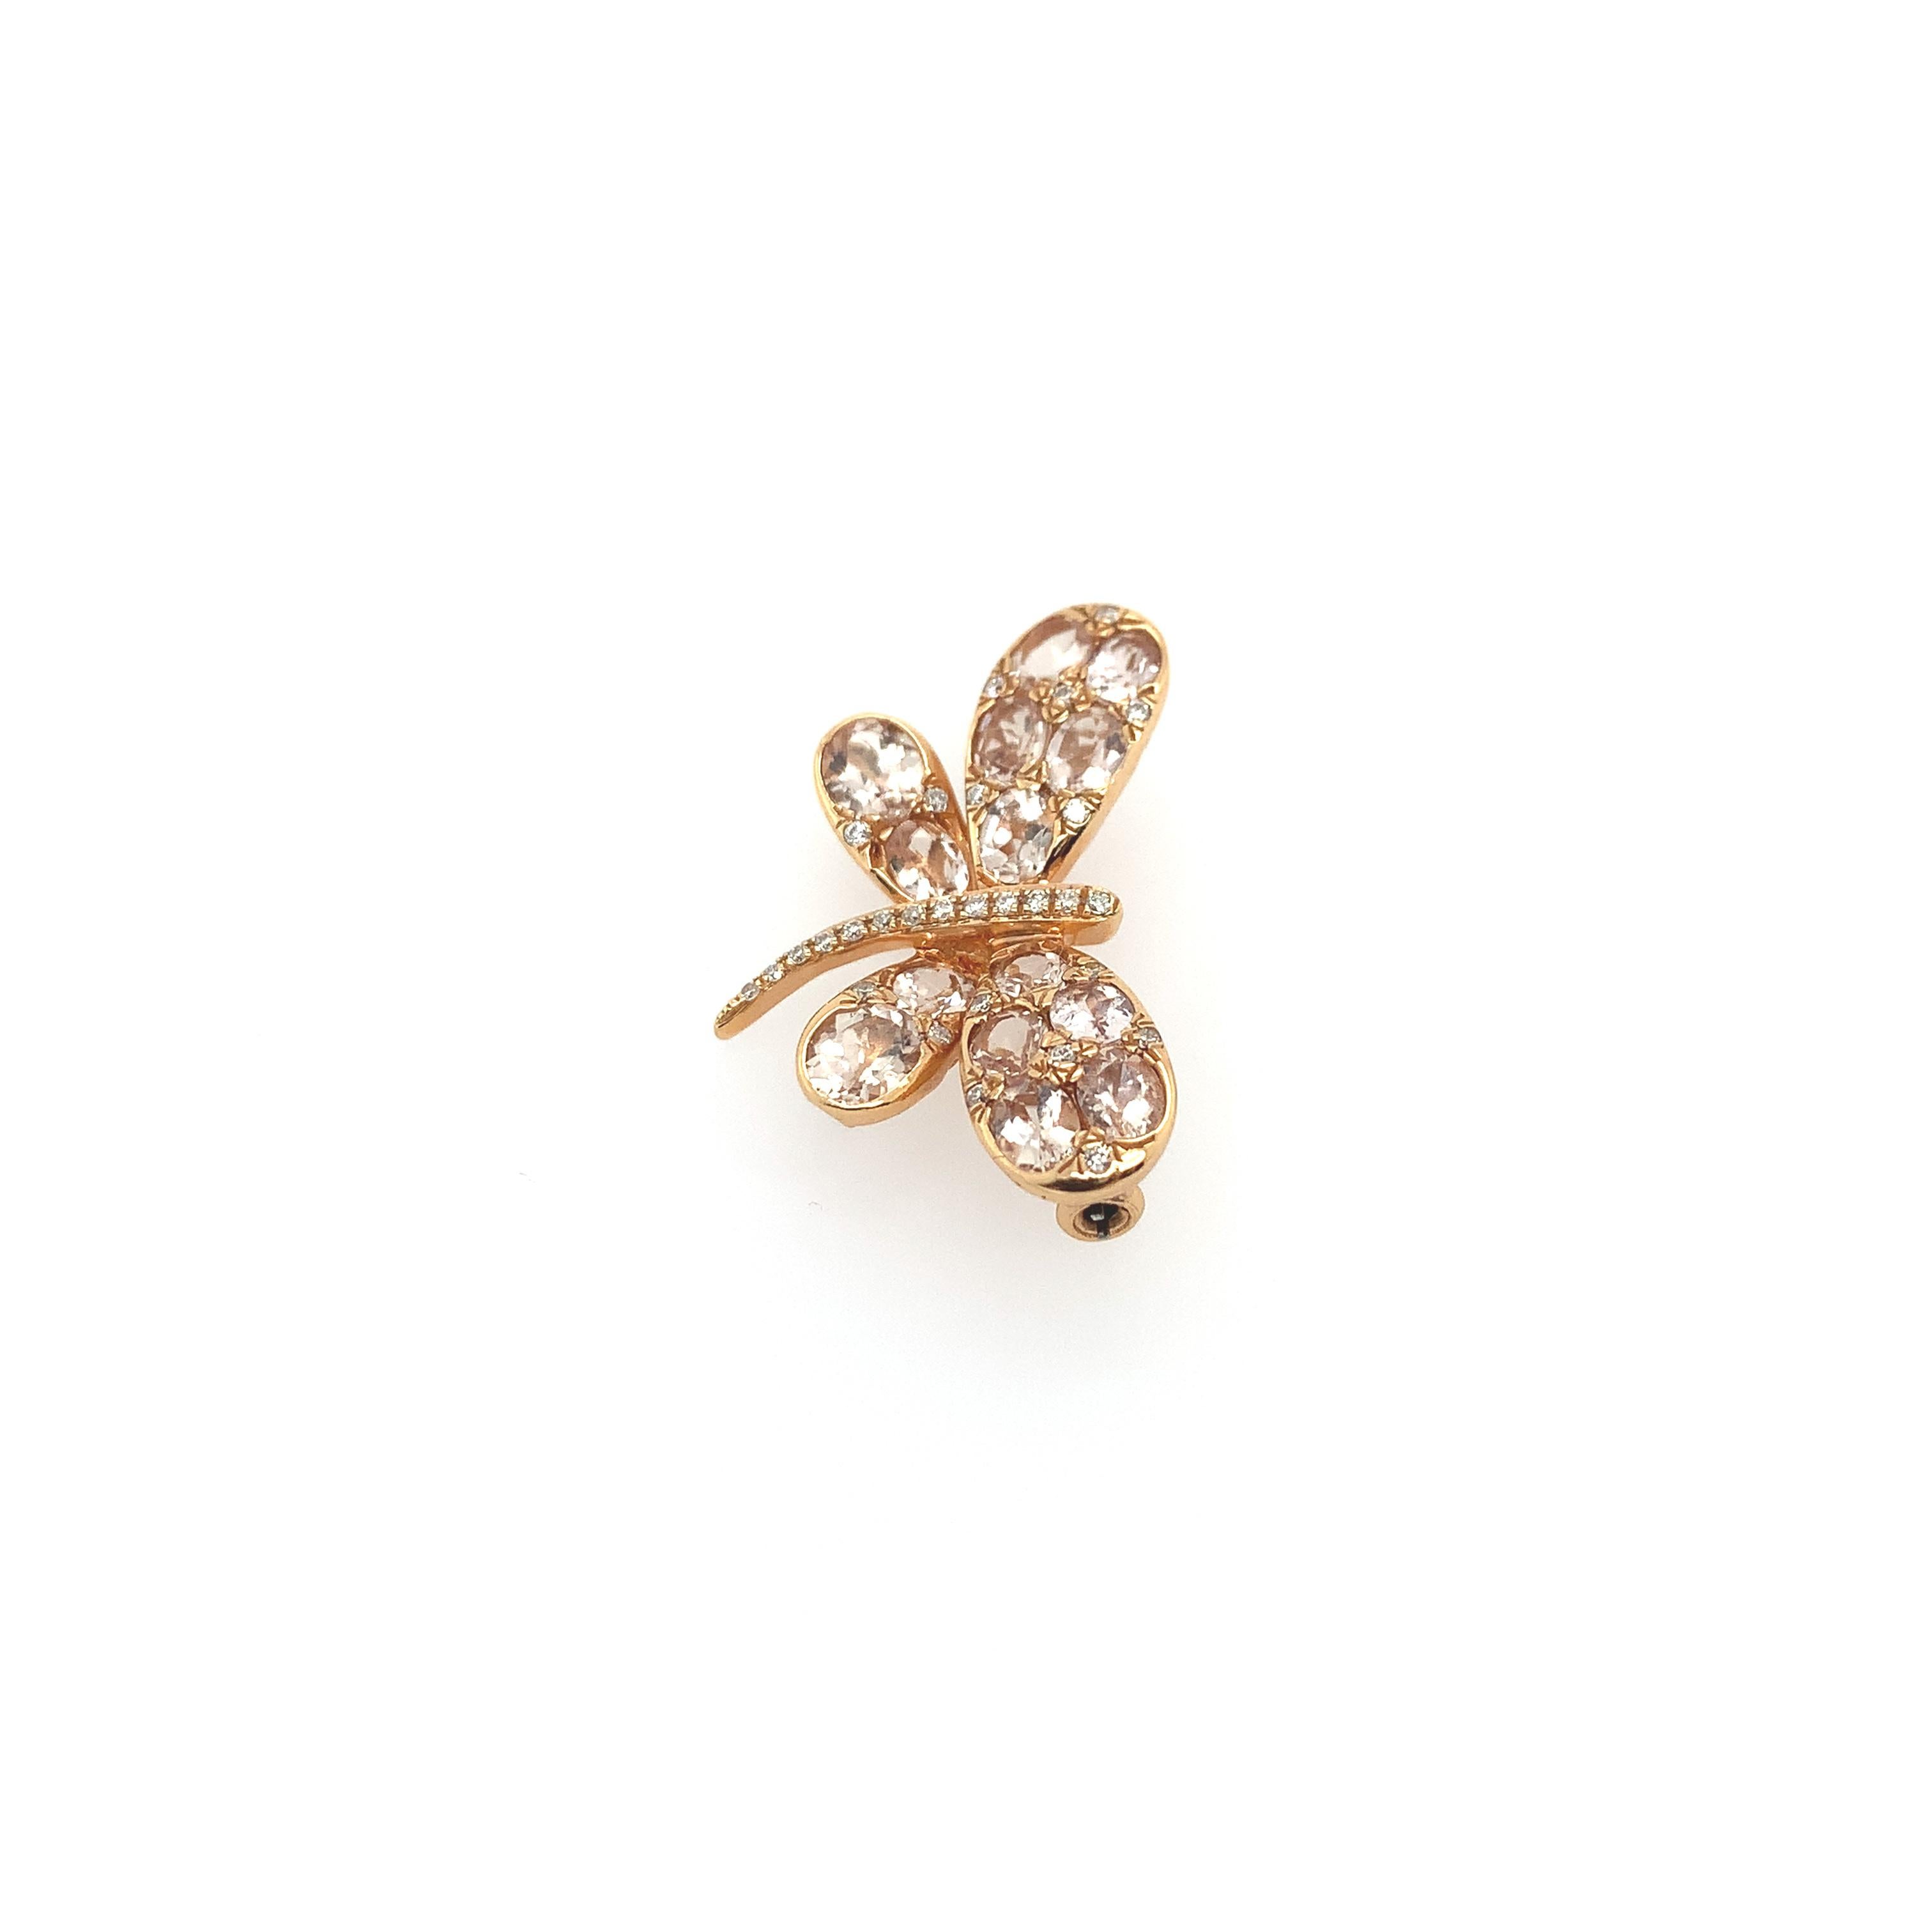 An exquisite dragonfly pin in 18K rose gold embellished with (14) fourteen morganite rose cut stones totaling an estimated 2.64 carats throughout its wings and studded with (29) twenty-nine diamonds totaling .14 carats on its wings and body. The